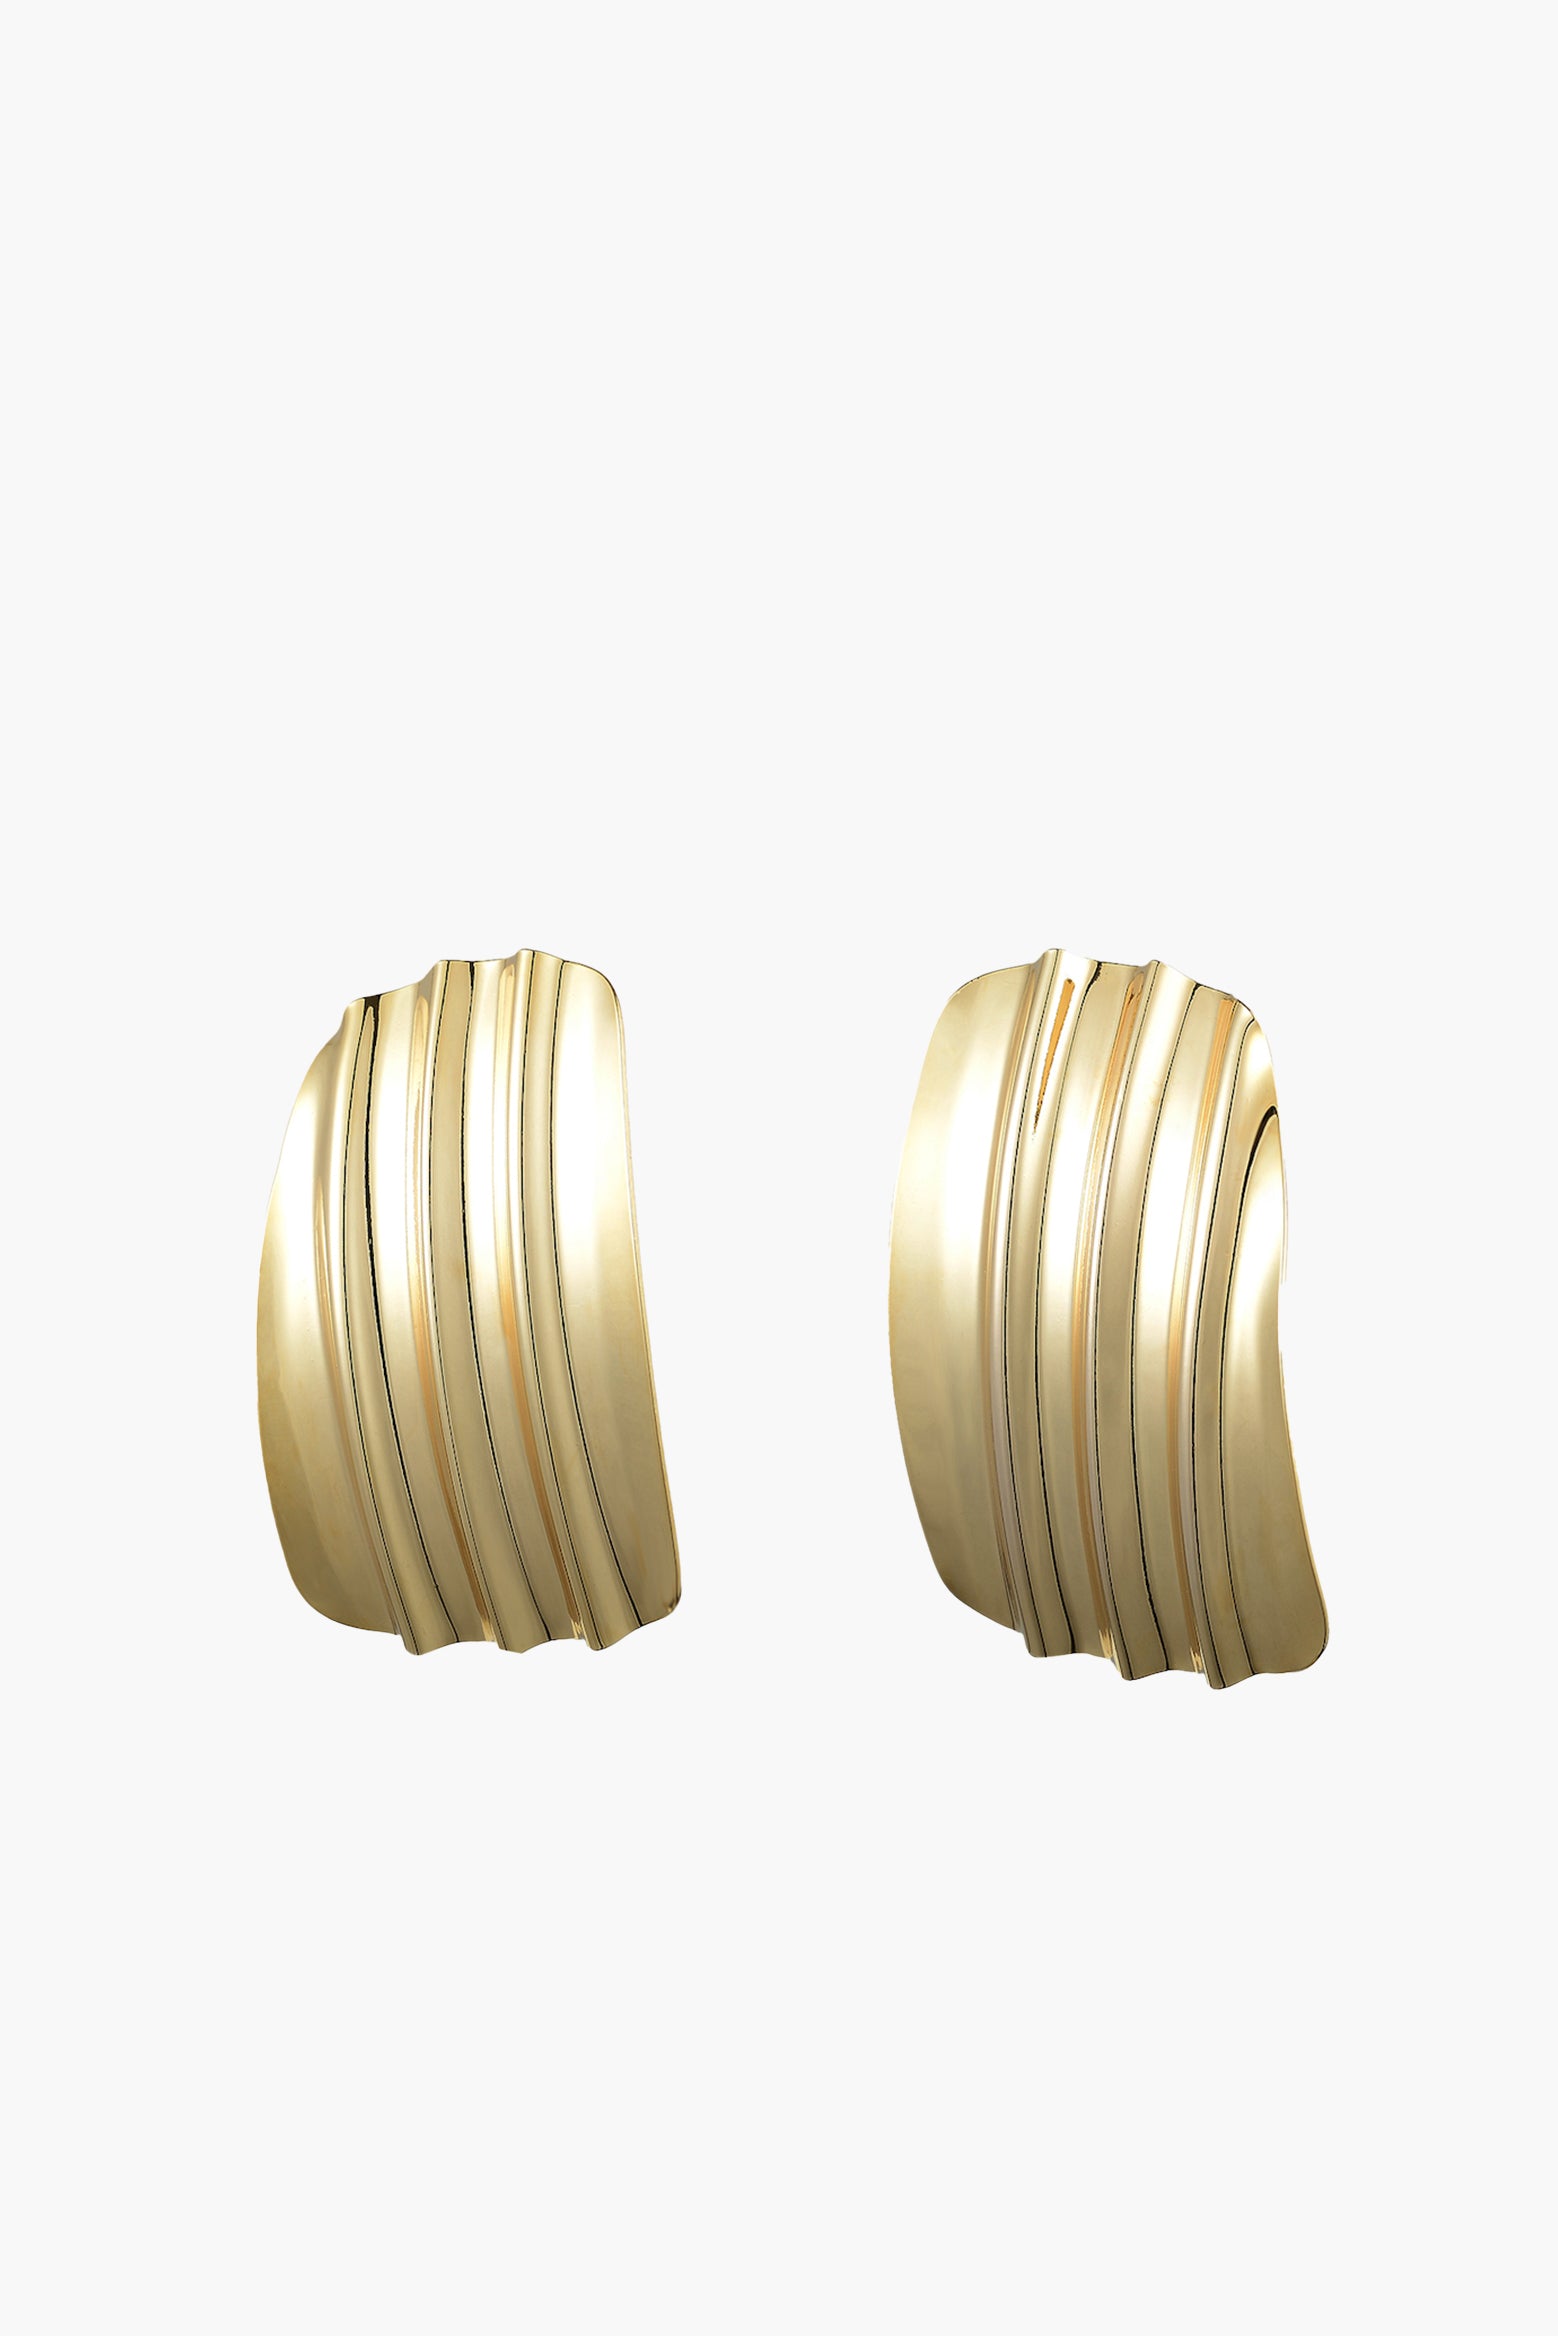 Anna Rossi Corrugated Time Earring in Gold available at The New Trend Australia.